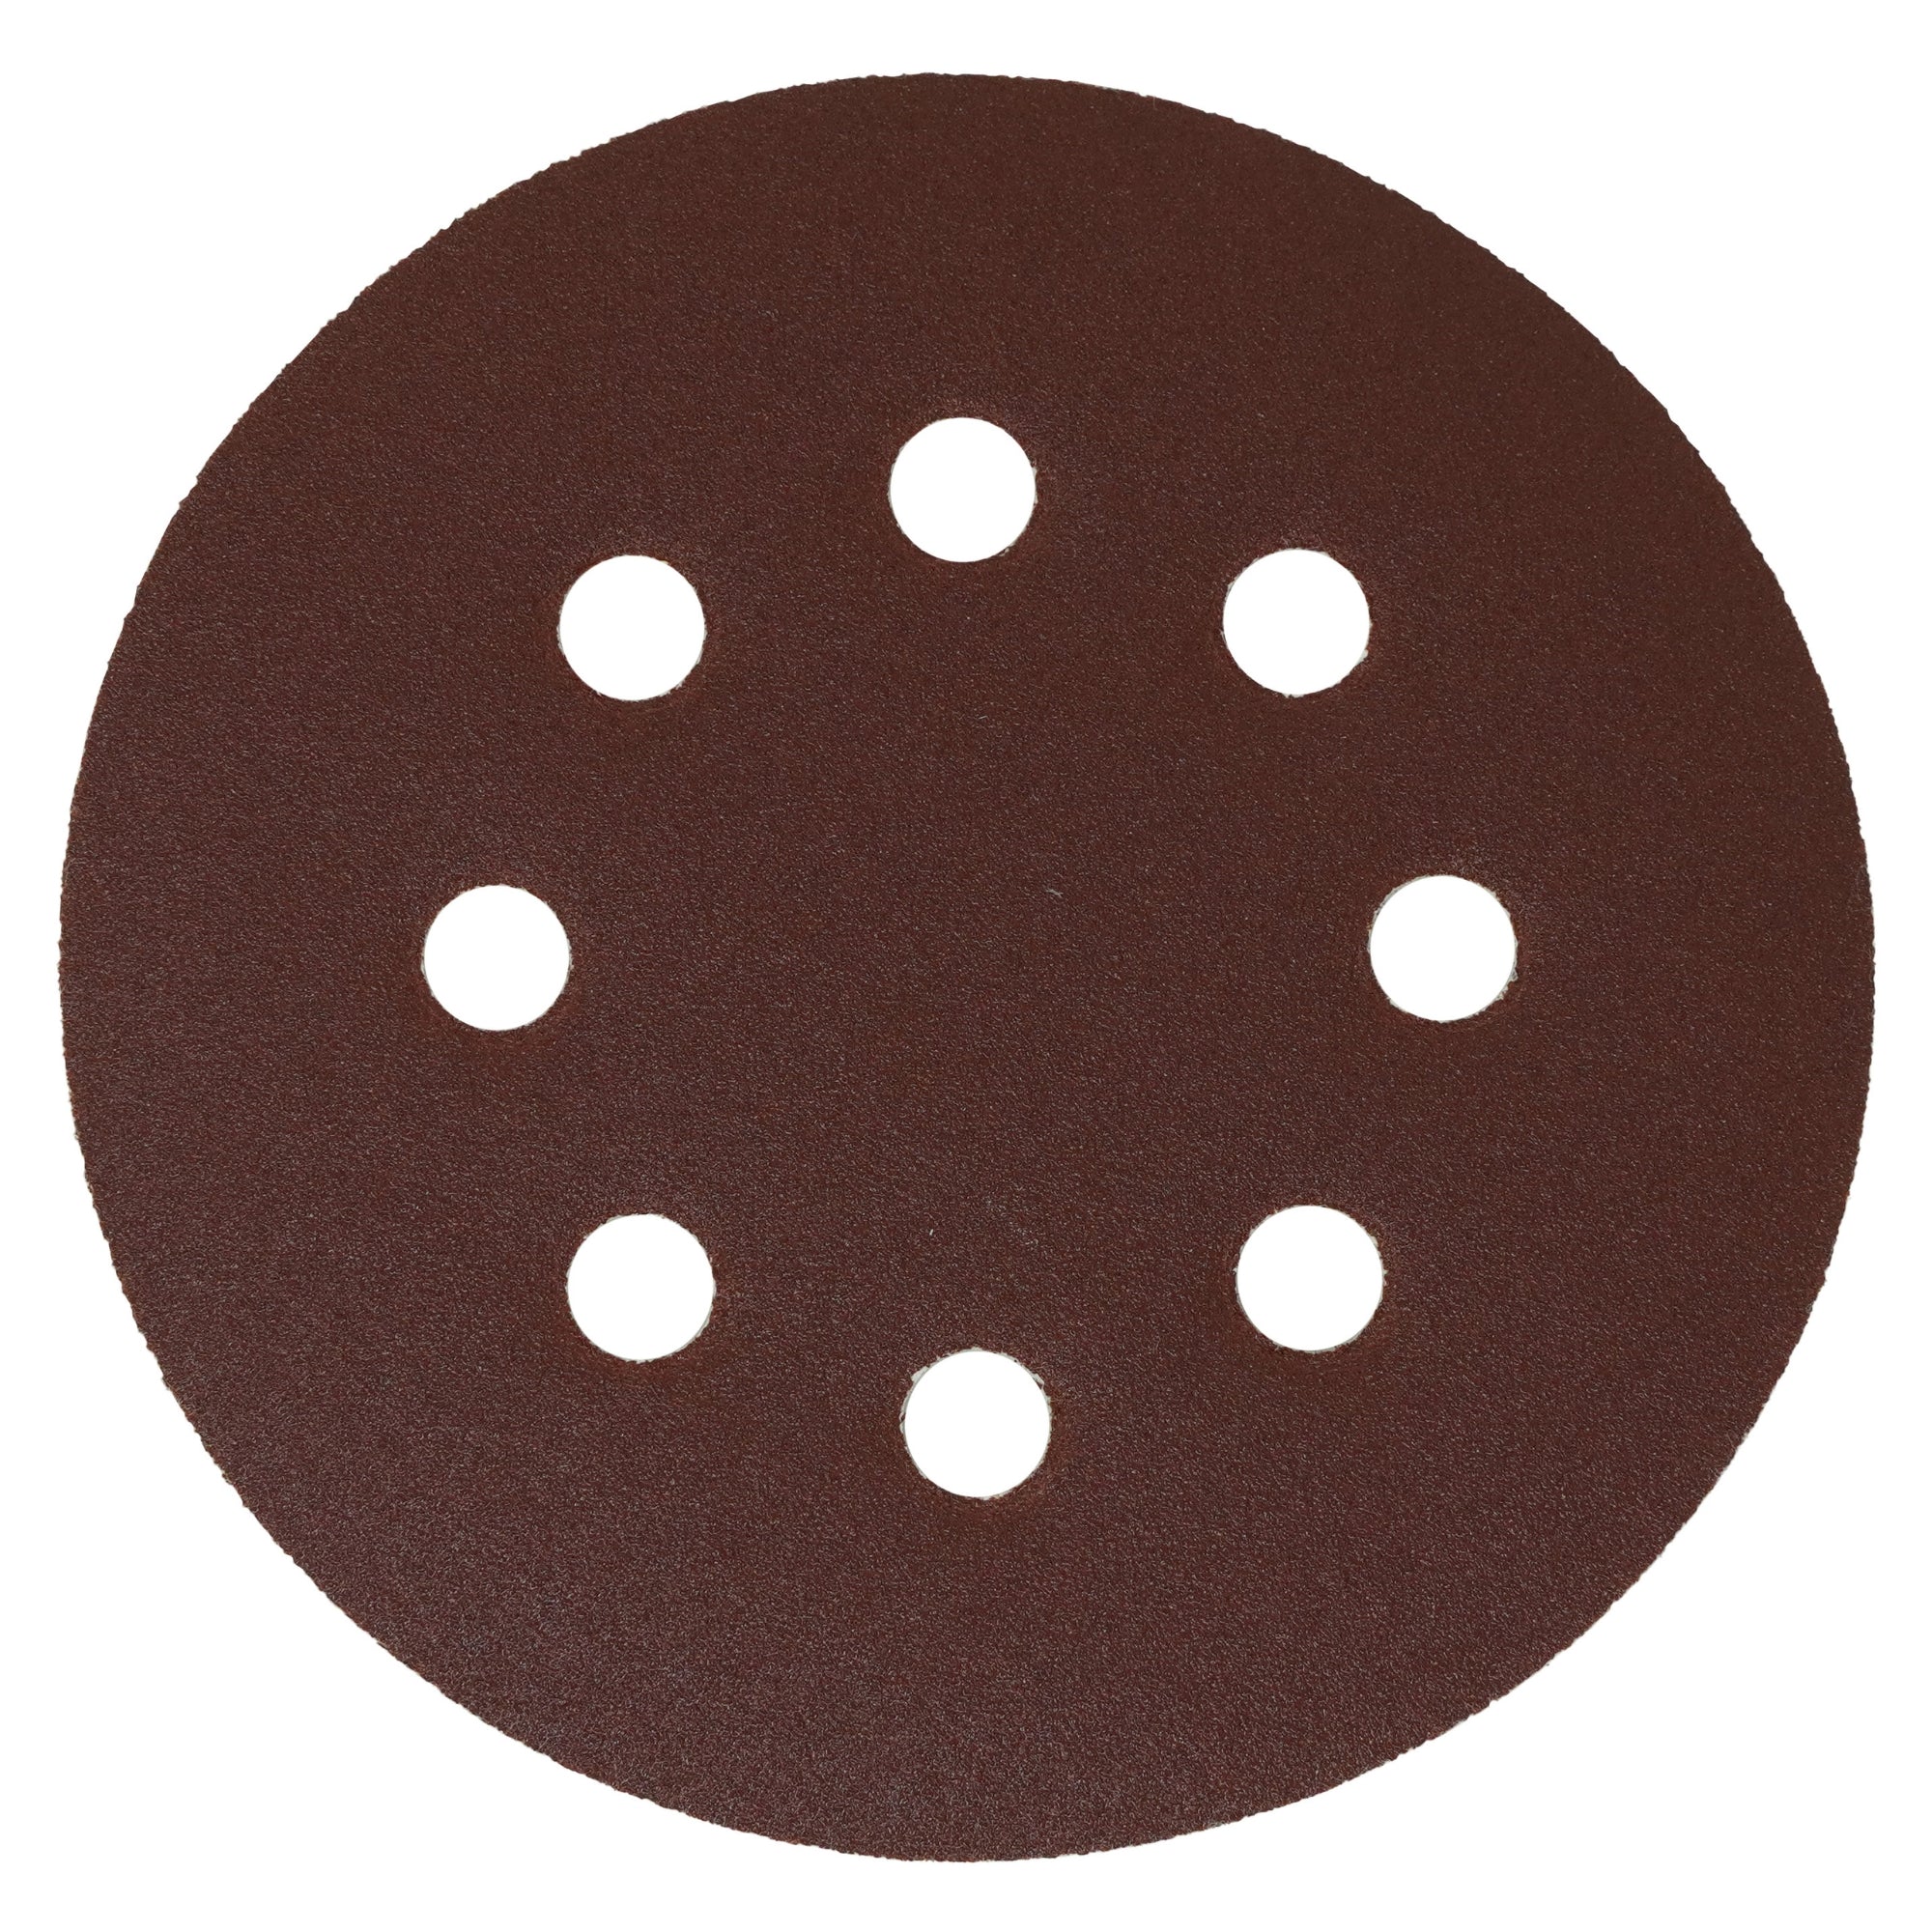 Richard 5" Mixed Grit Radial Sanding Sheets with 8 Holes (5 Pack)